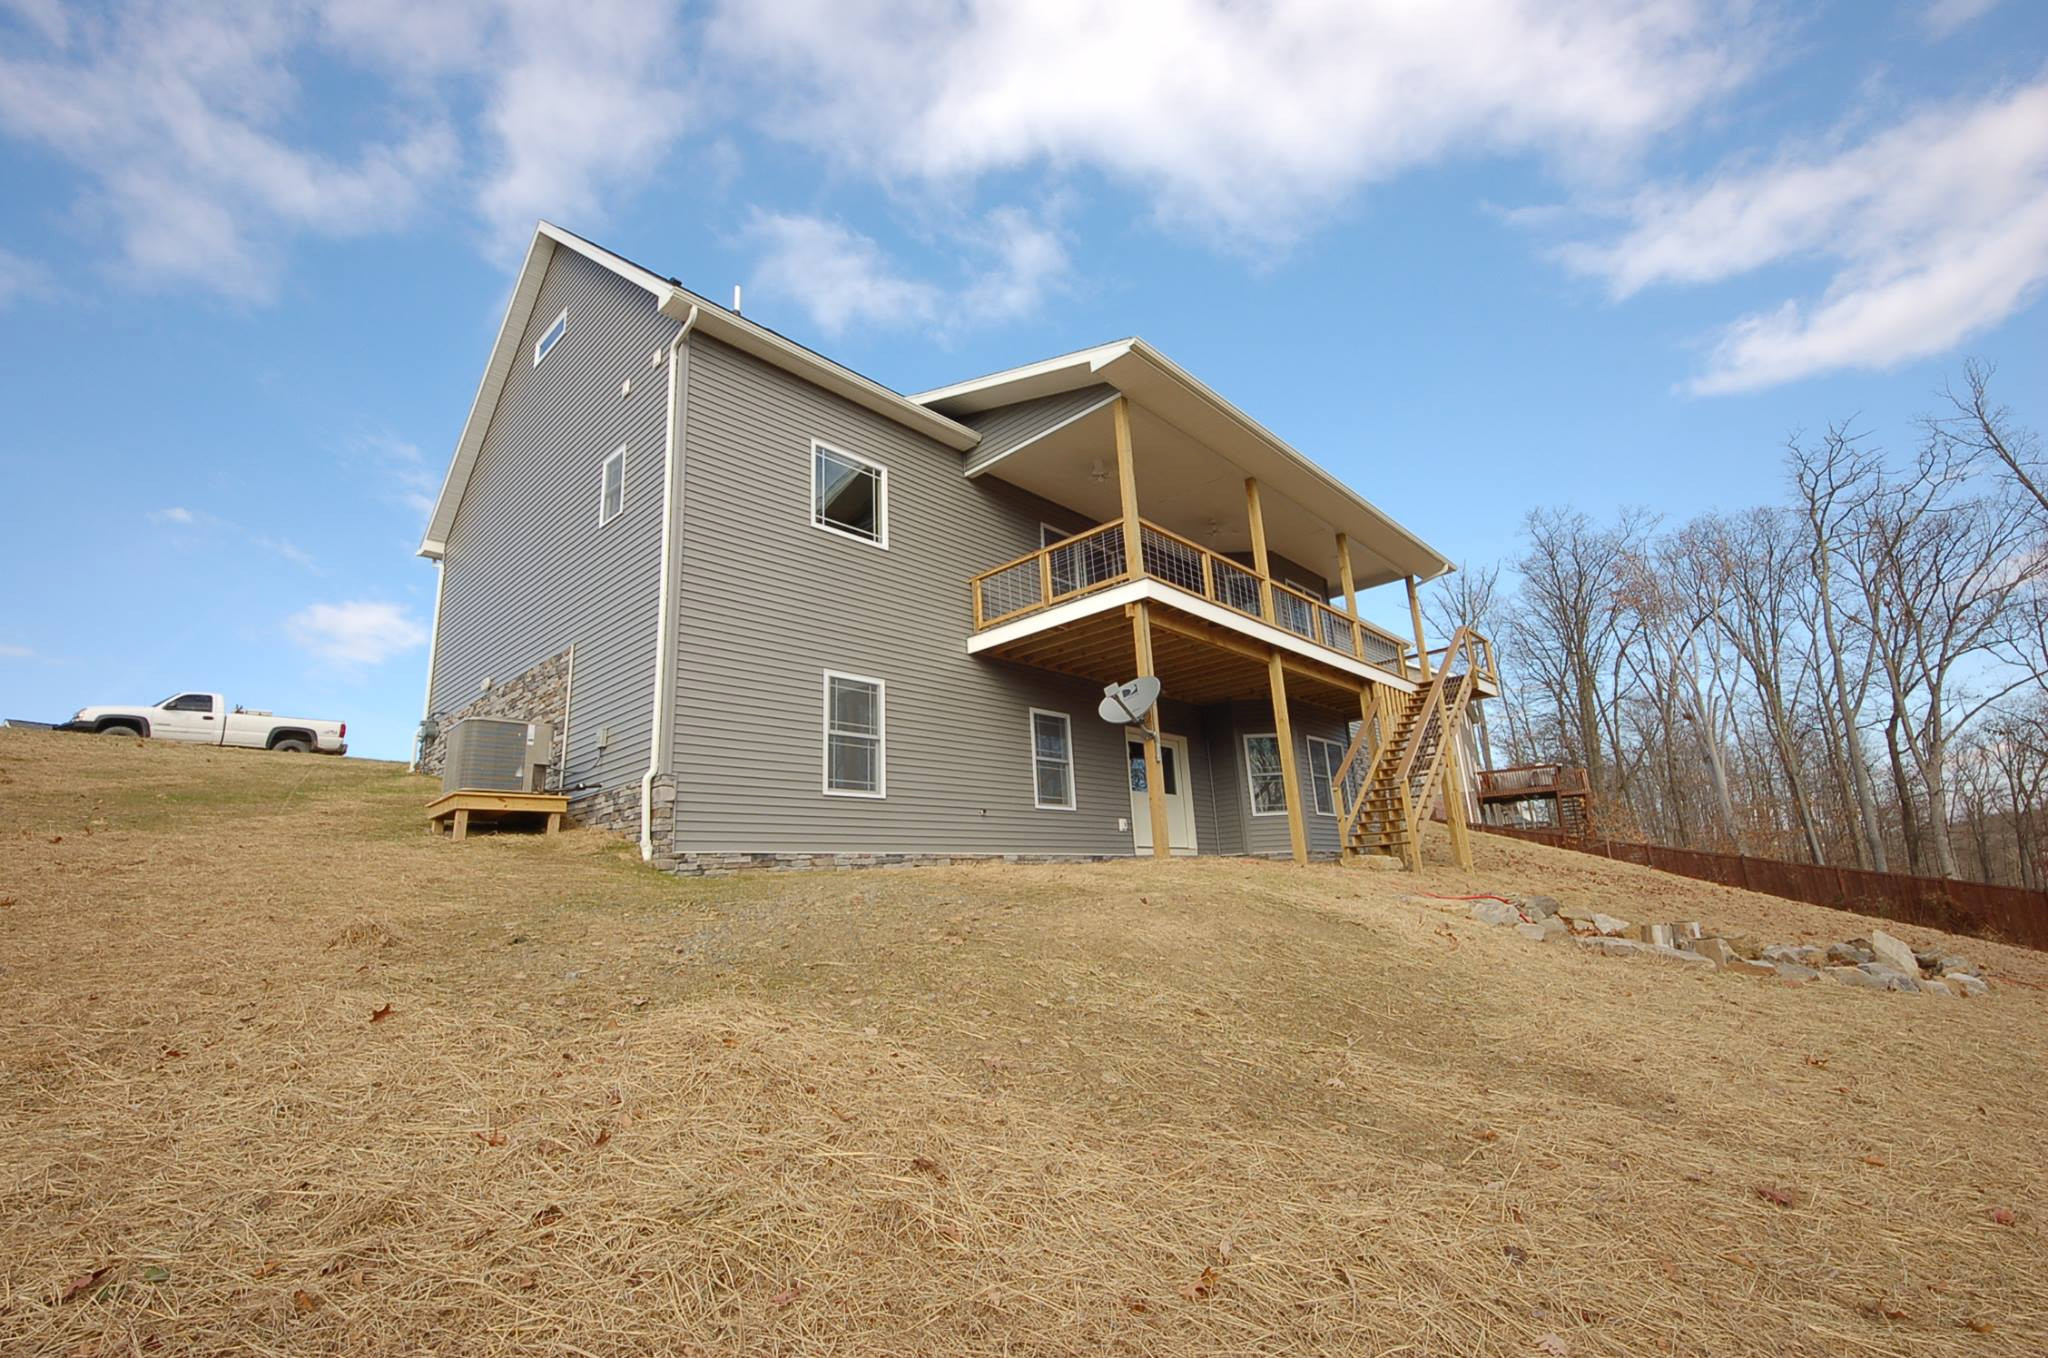 New Home Construction - on Morgantown hill